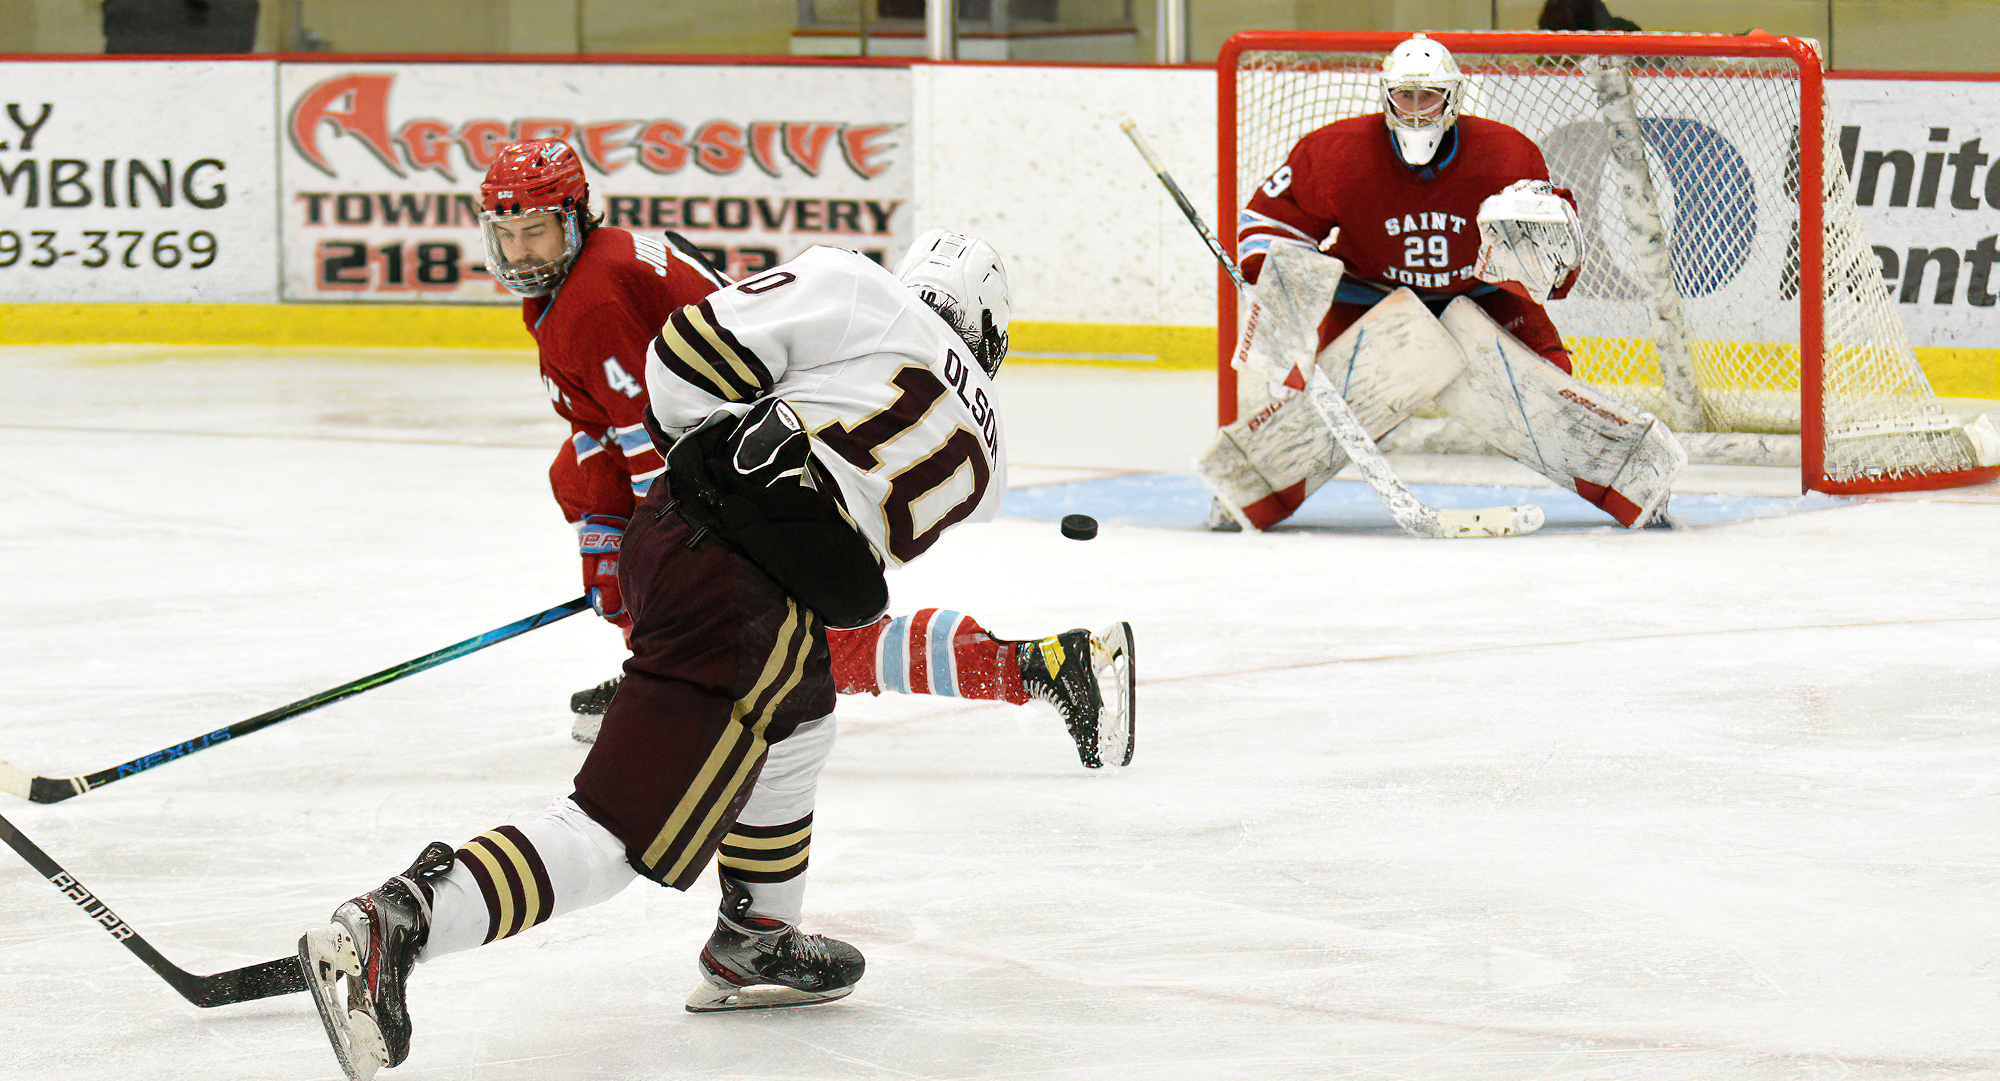 Hunter Olson fires a shot on goal in the Cobbers series finale with St. John's. CC outshot the Johnnies 31-20 in the game.